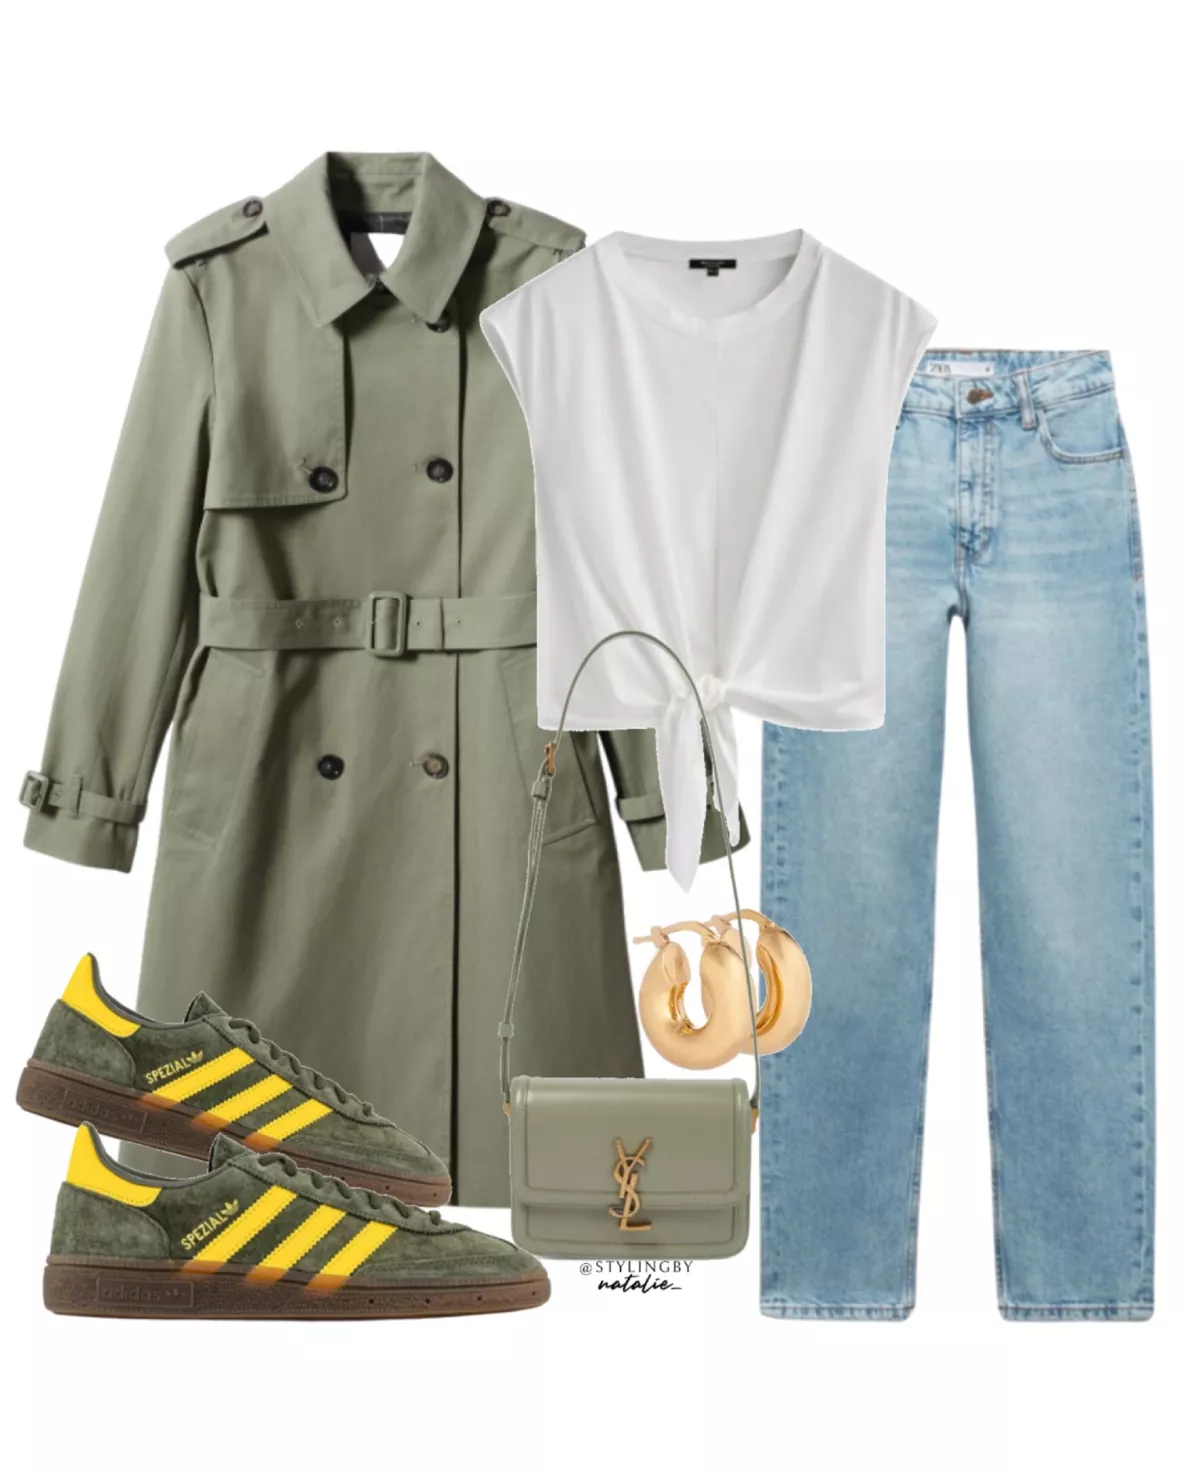 TRENCH COAT and jeans outfit  White tee jeans, Casual fall